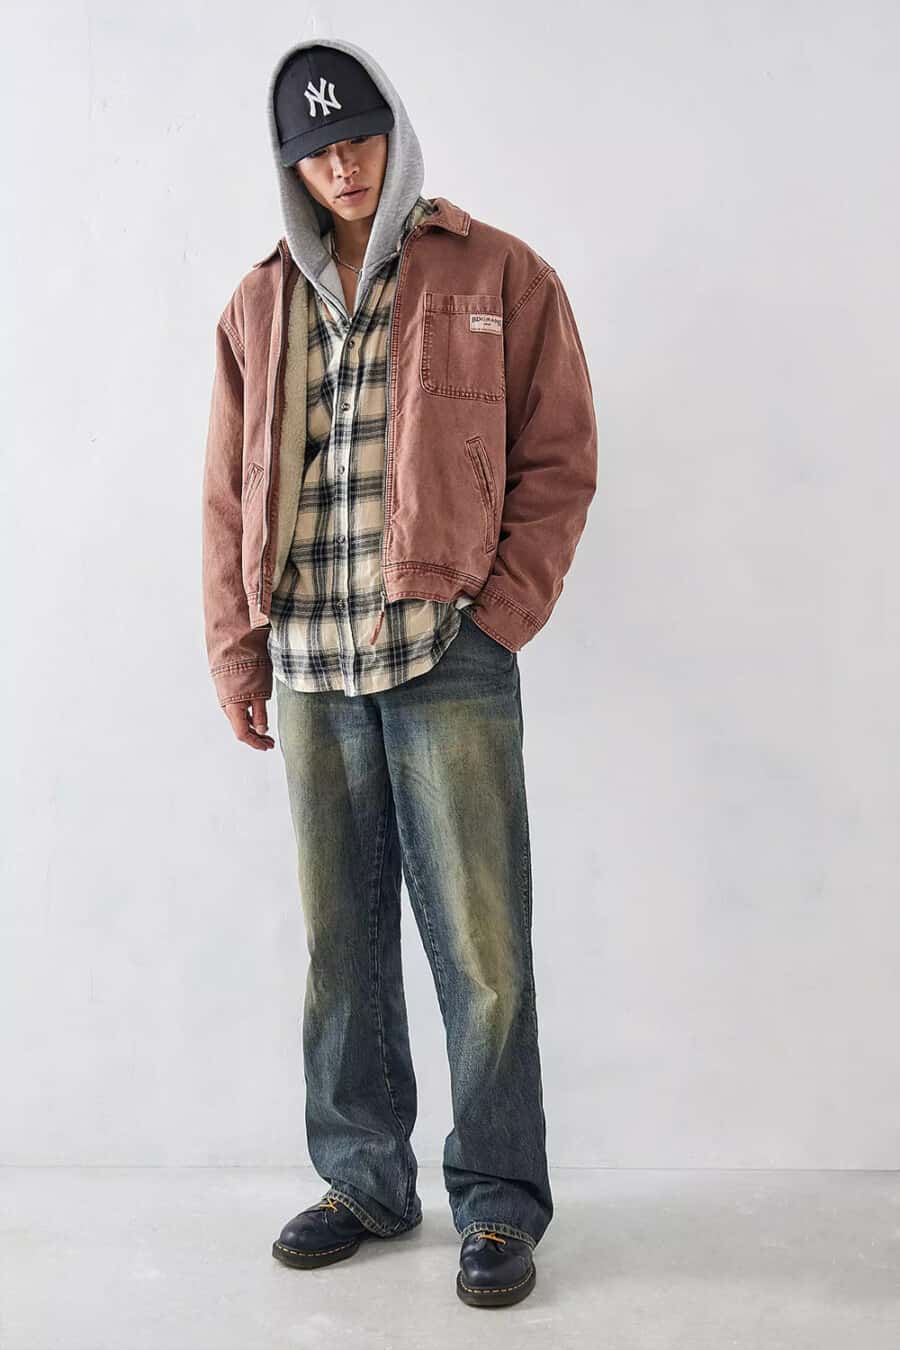 Men's baggy faded jeans, off-white/black check shirt, grey hoodie, red washed out jacket and chunky Dr. Martens boots grunge outfit